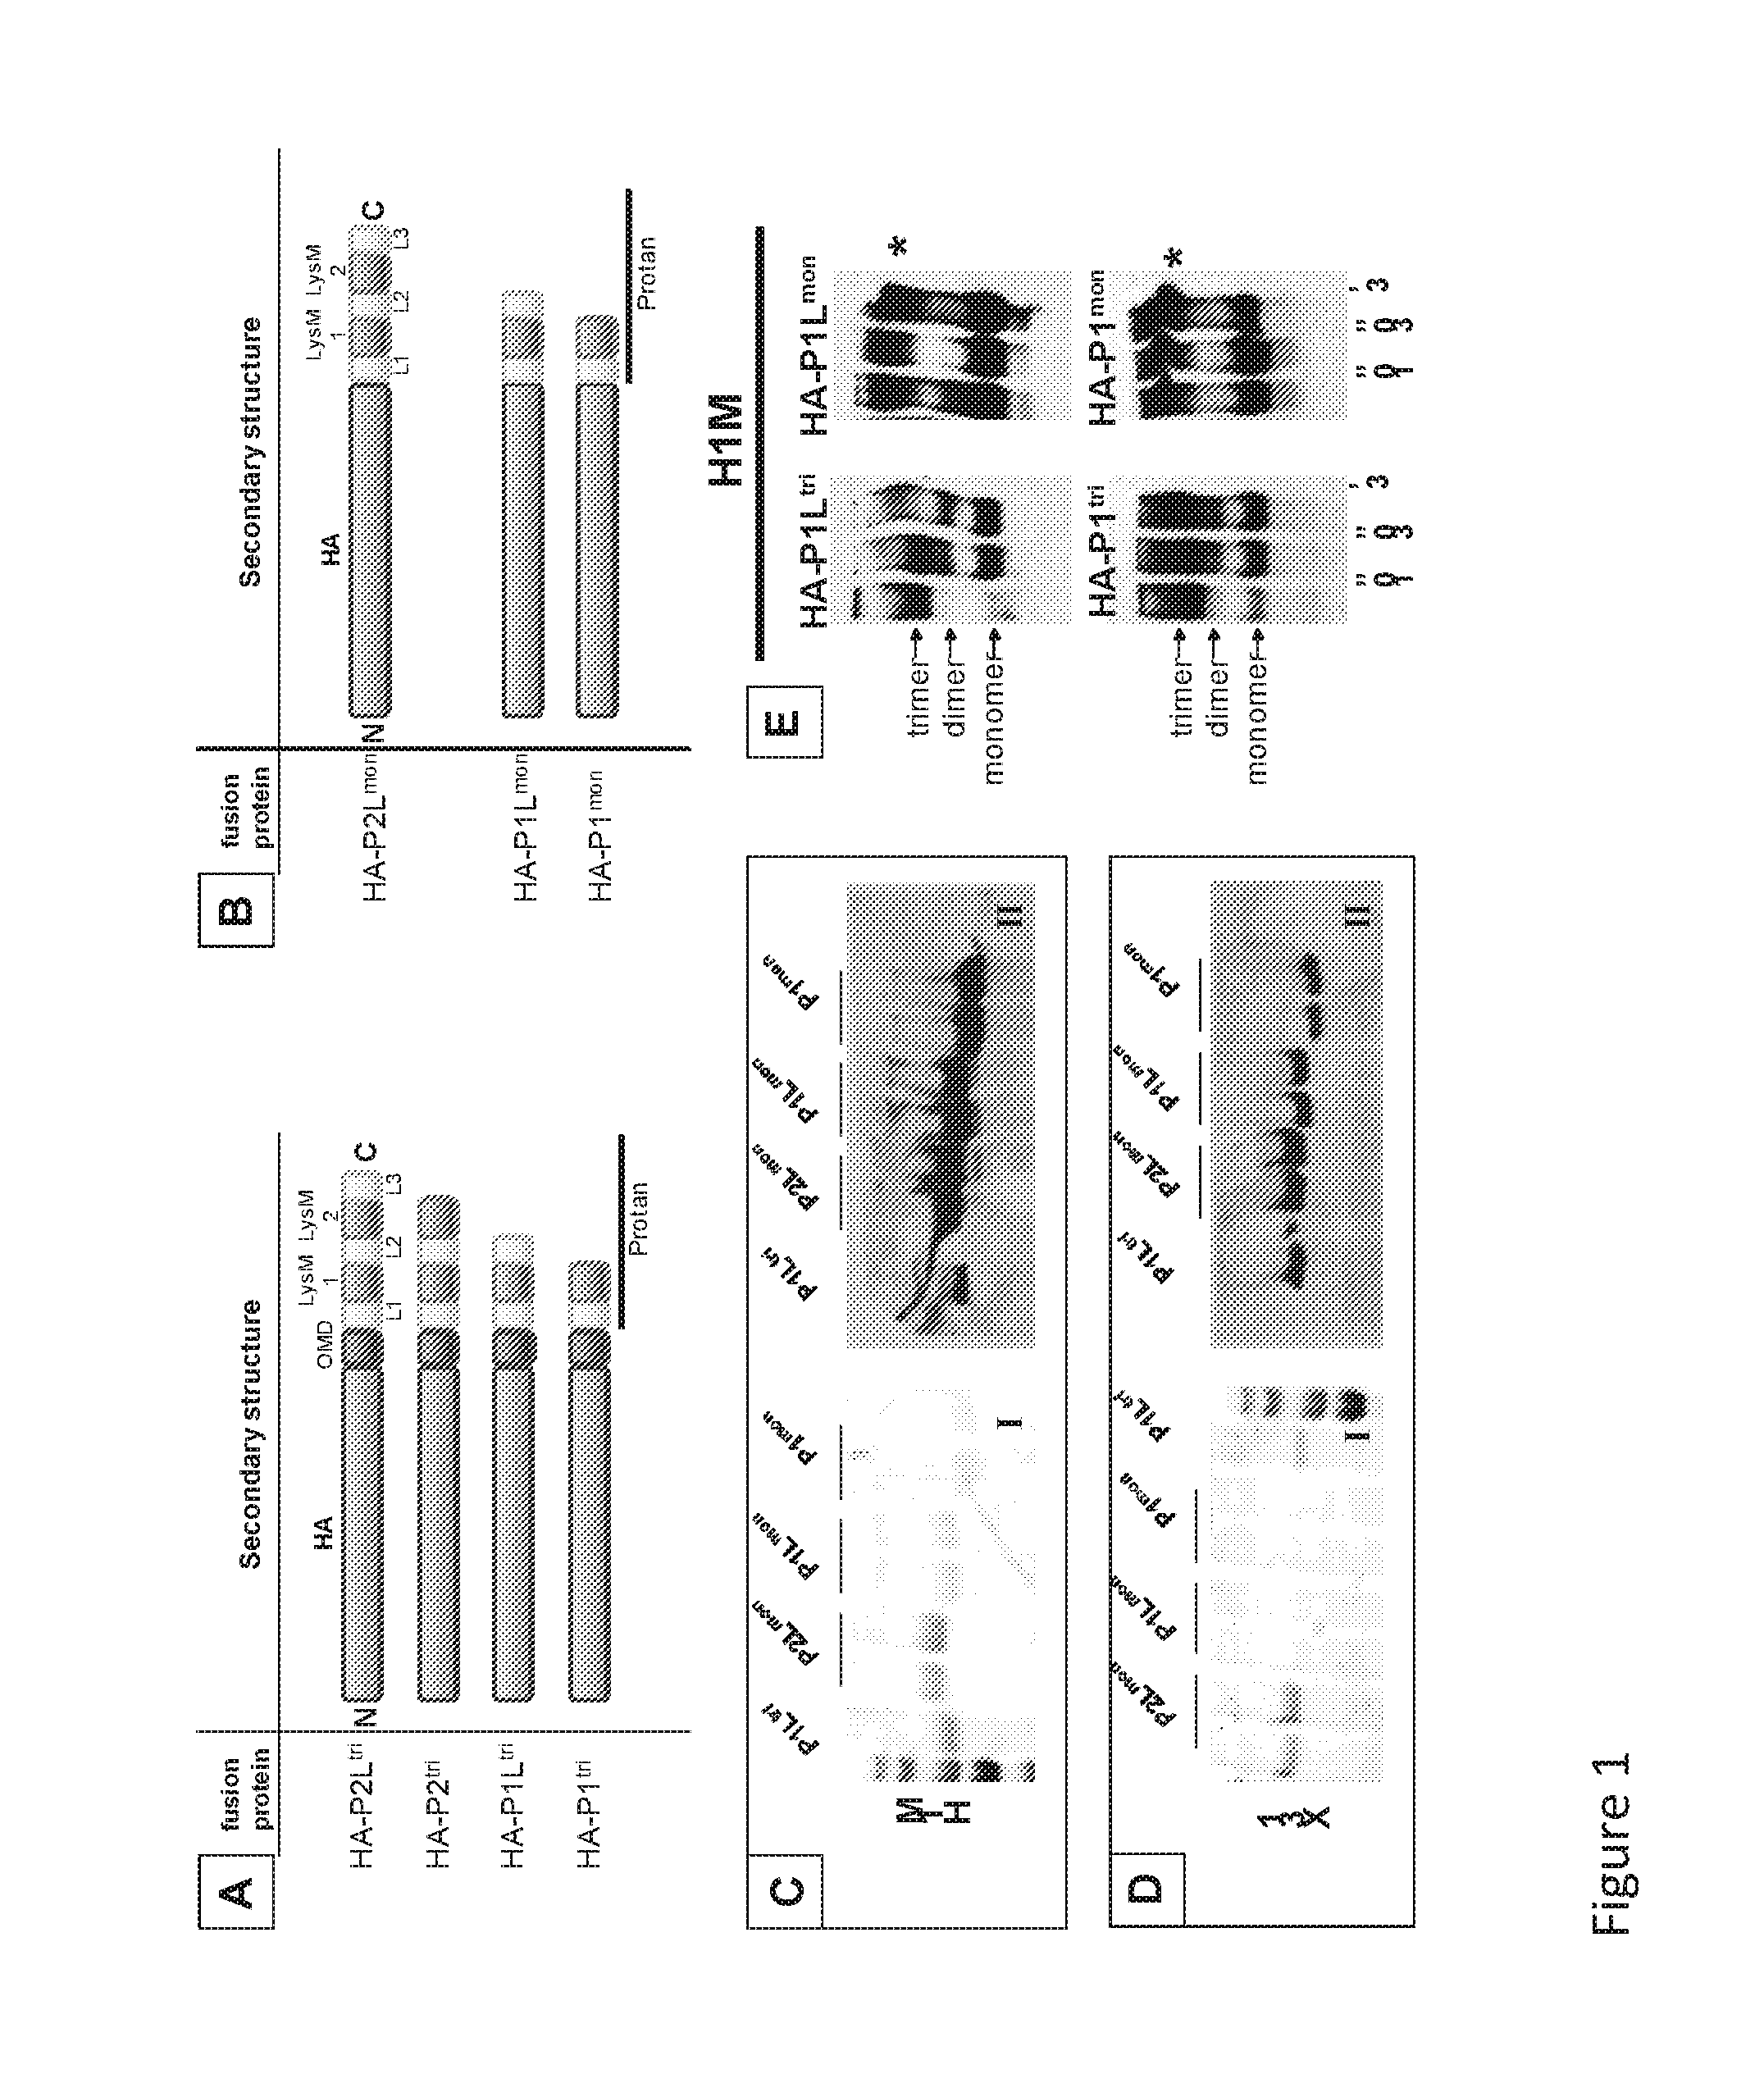 Immunogenic compositions in particulate form and methods for producing the same